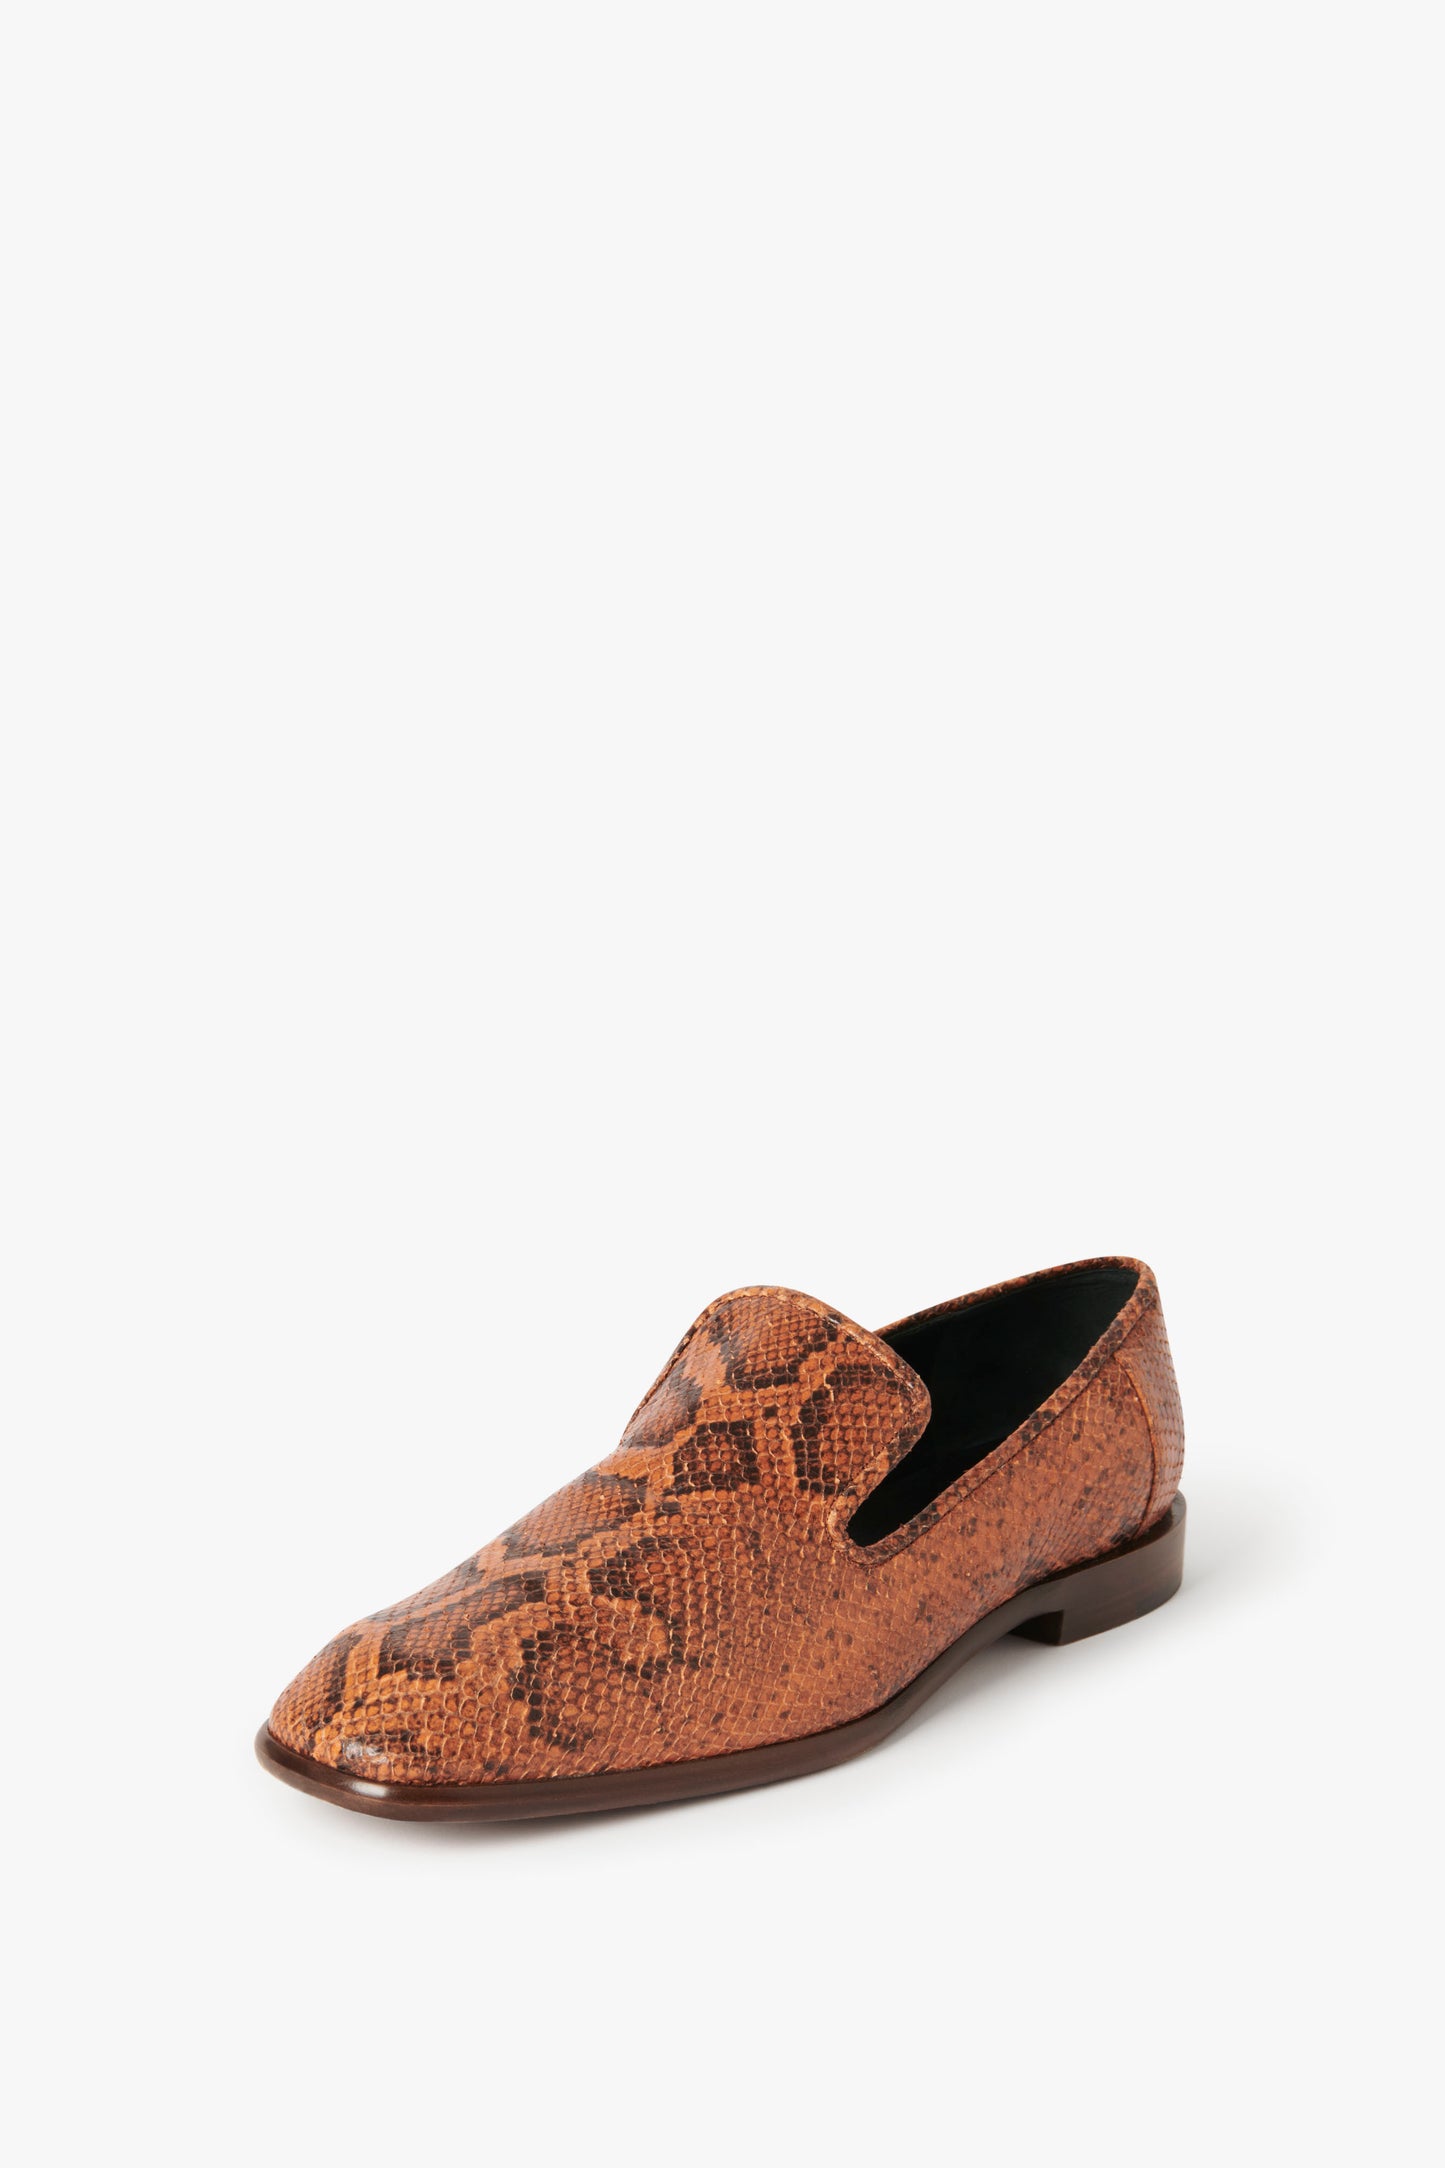 The Hanna Loafer in Copper Snake Print by Victoria Beckham, part of the Spring Summer 2022 collection, is displayed against a white background.